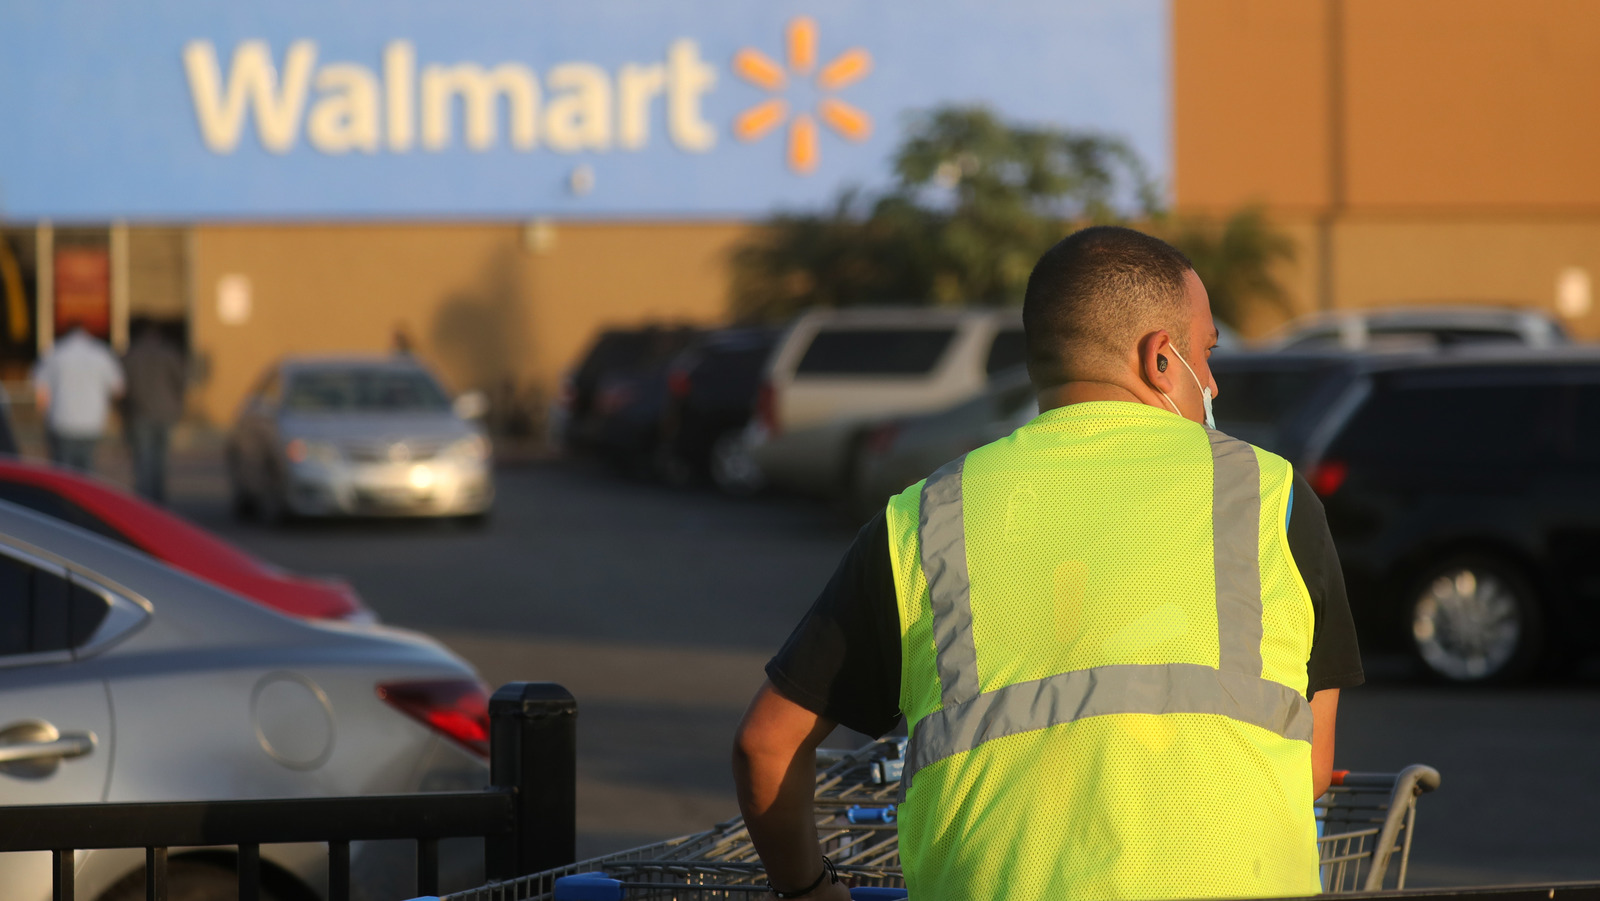 How Rich Is The Walmart CEO And What's The Average Pay Of Its Employees?